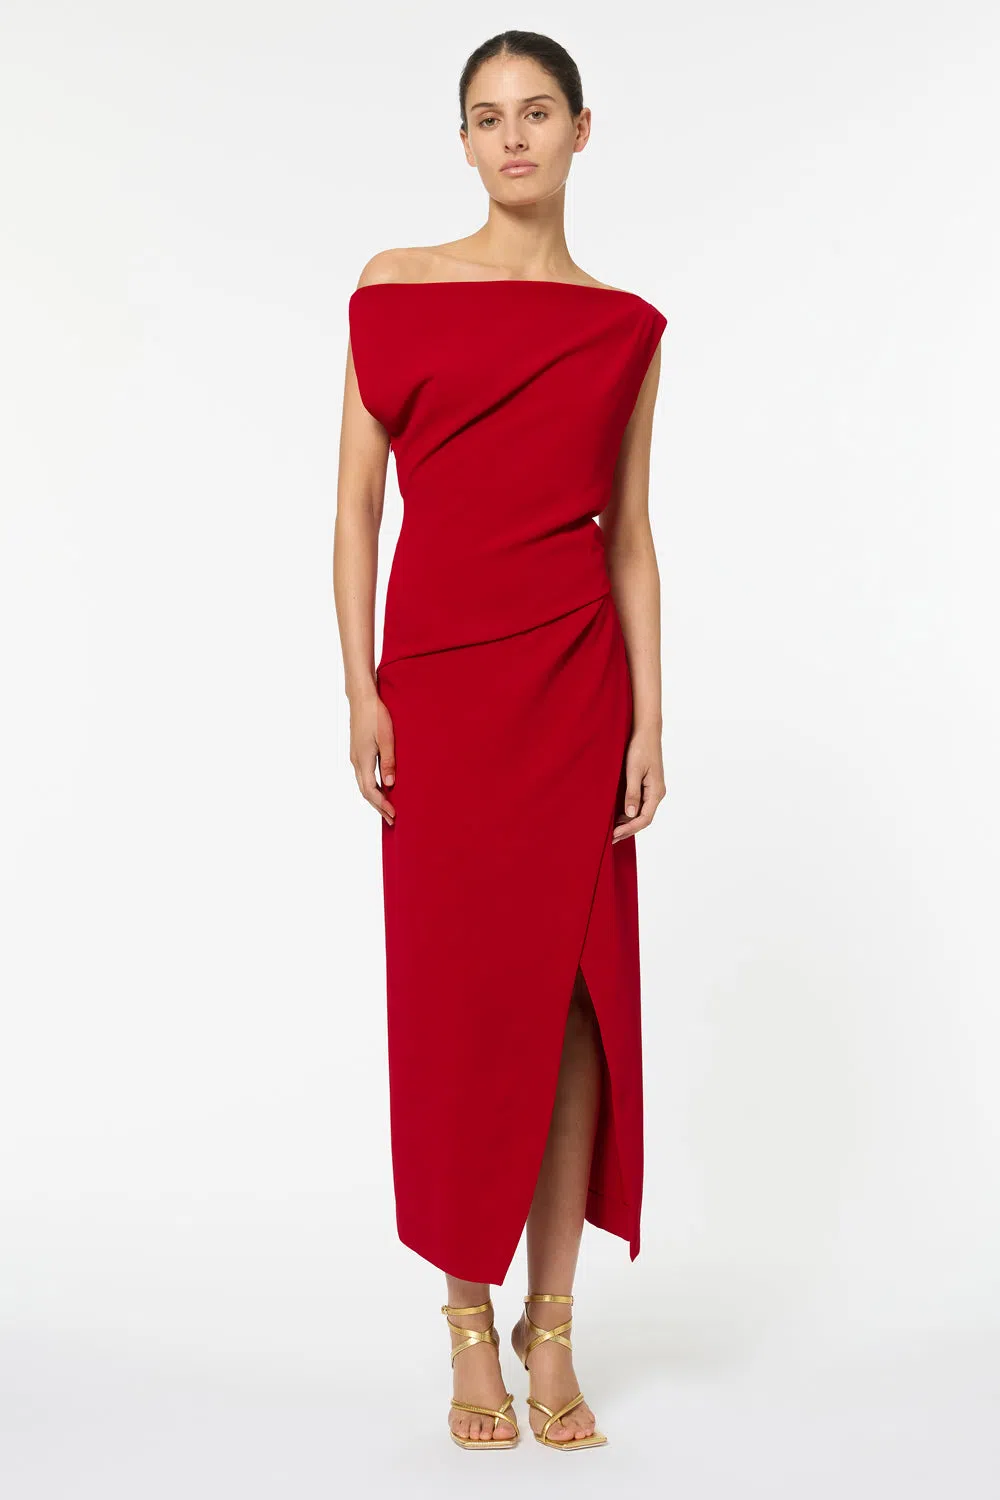 Manning Cartell Editor’s Pick Dress Red Size 8 | The Volte